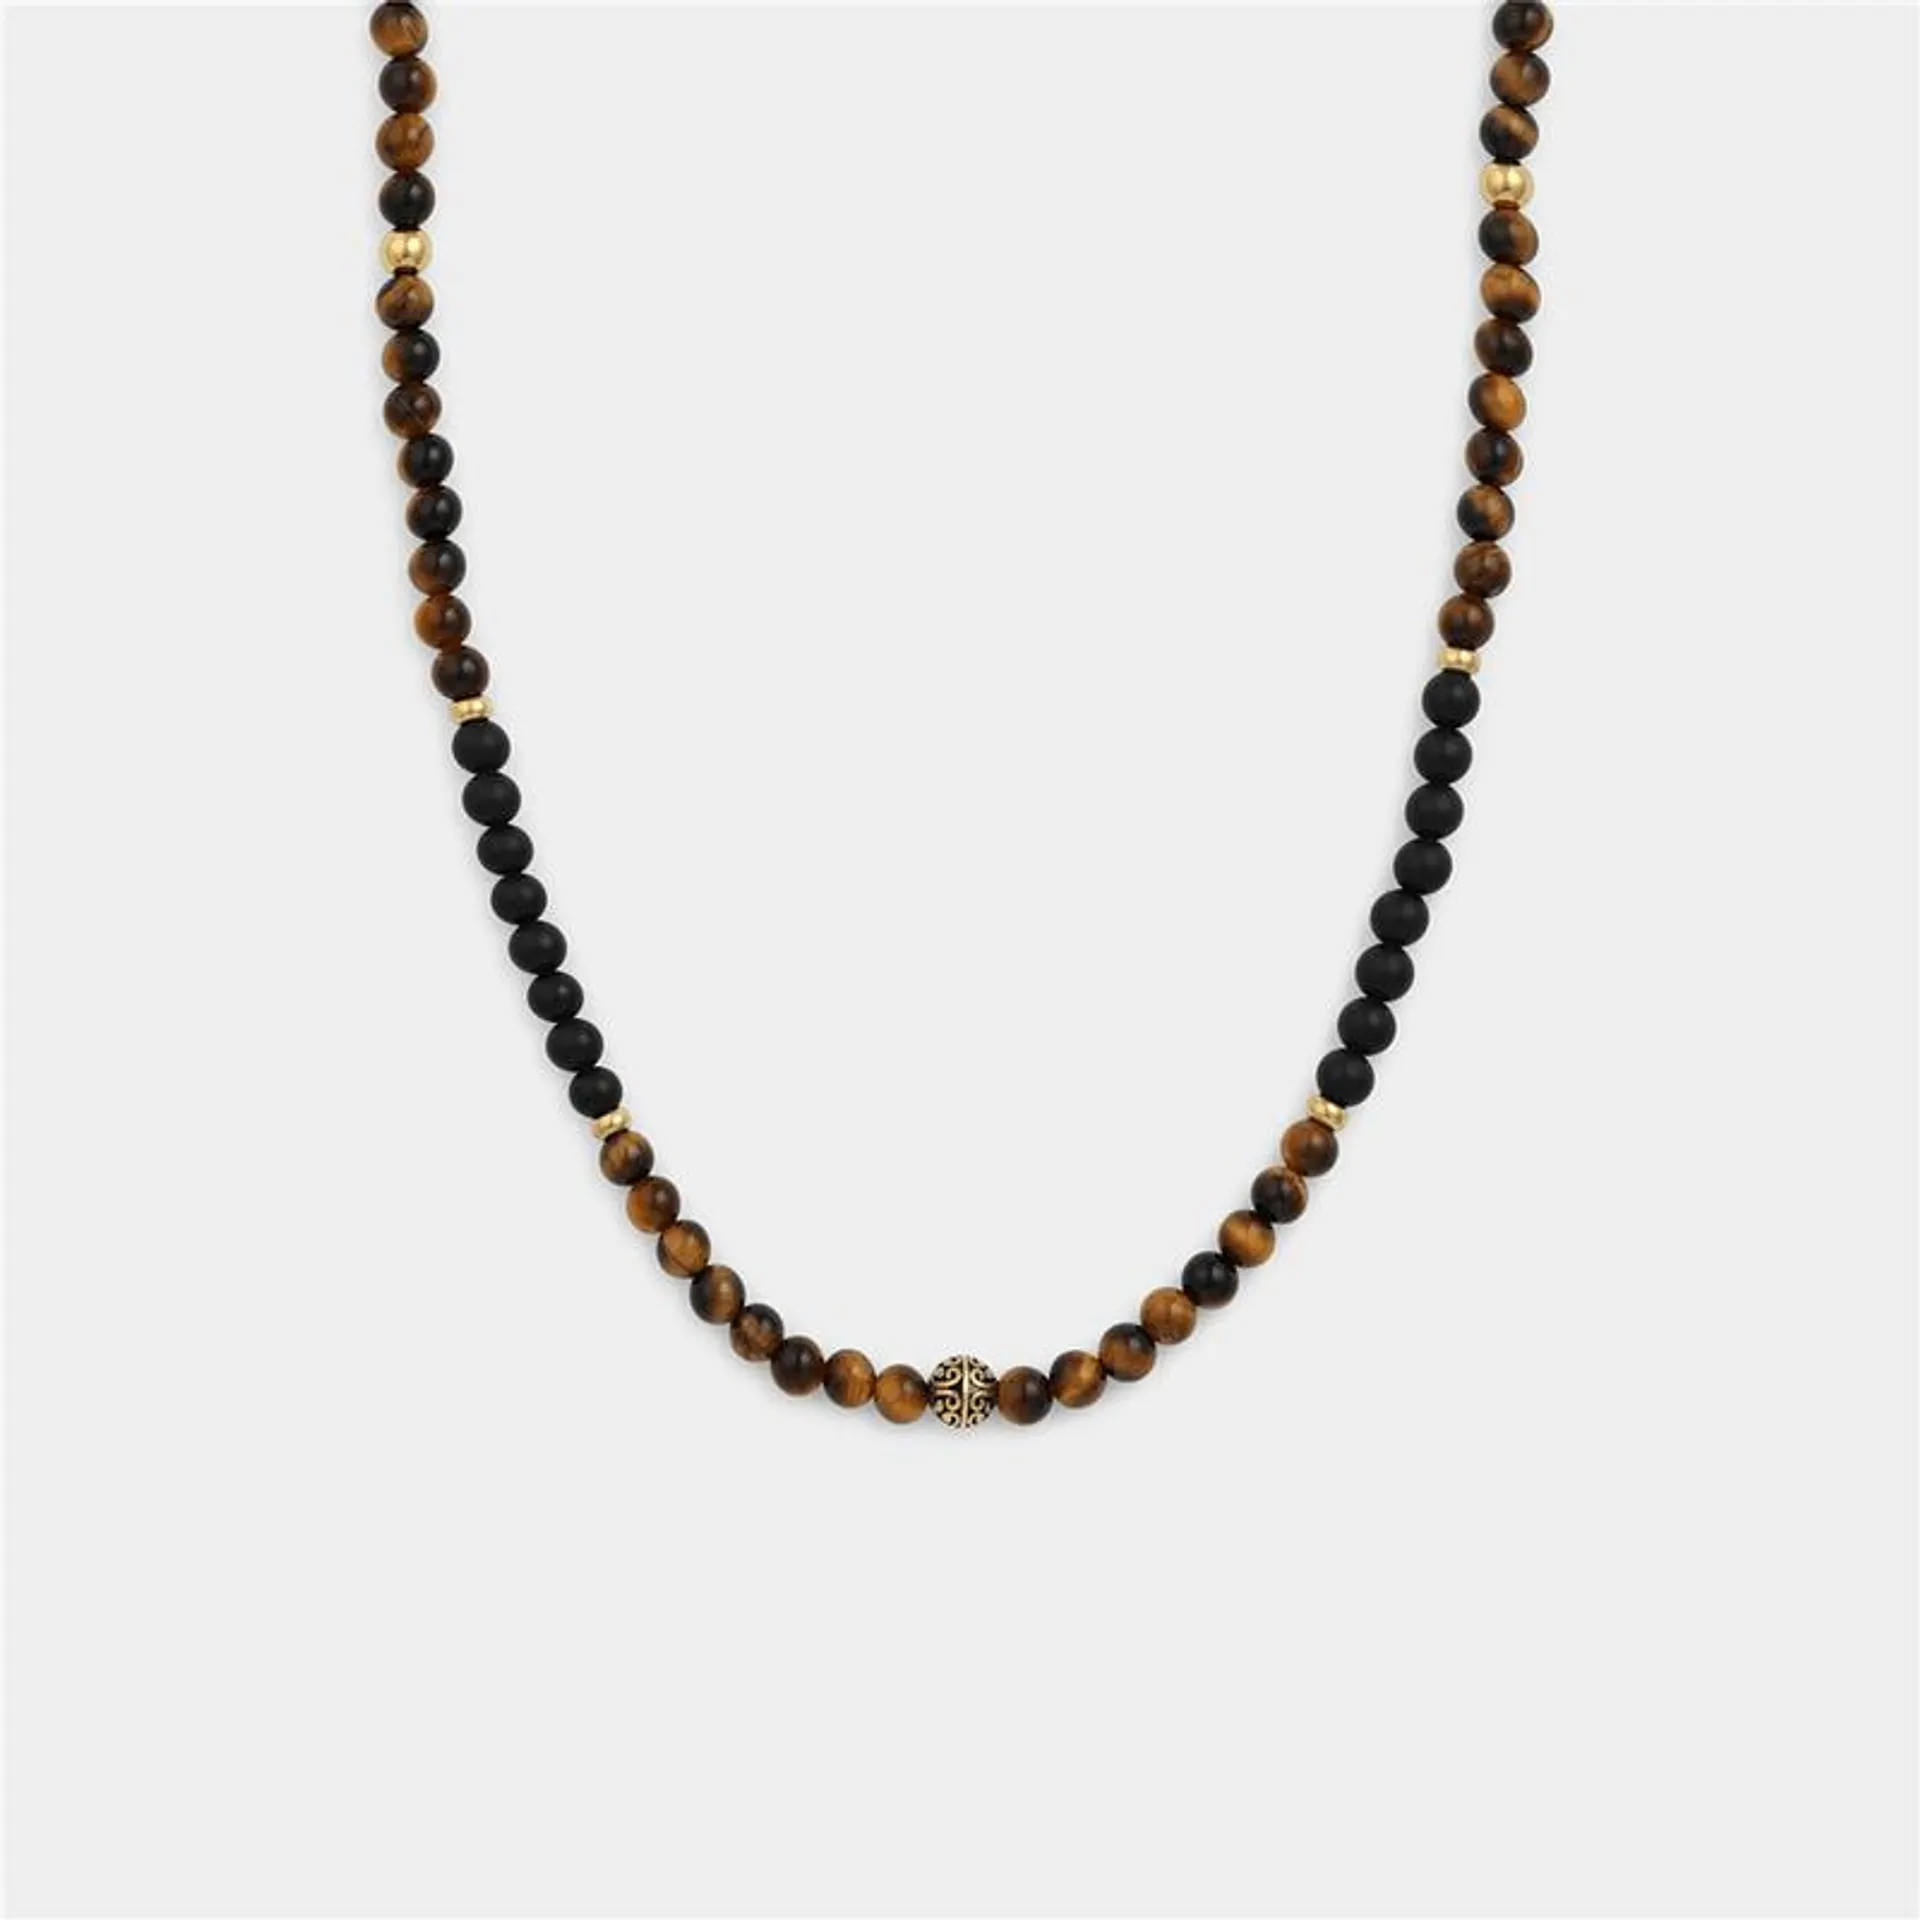 Stainless Steel Gold Plated Tiger’s Eye & Black Agate Bead Necklace